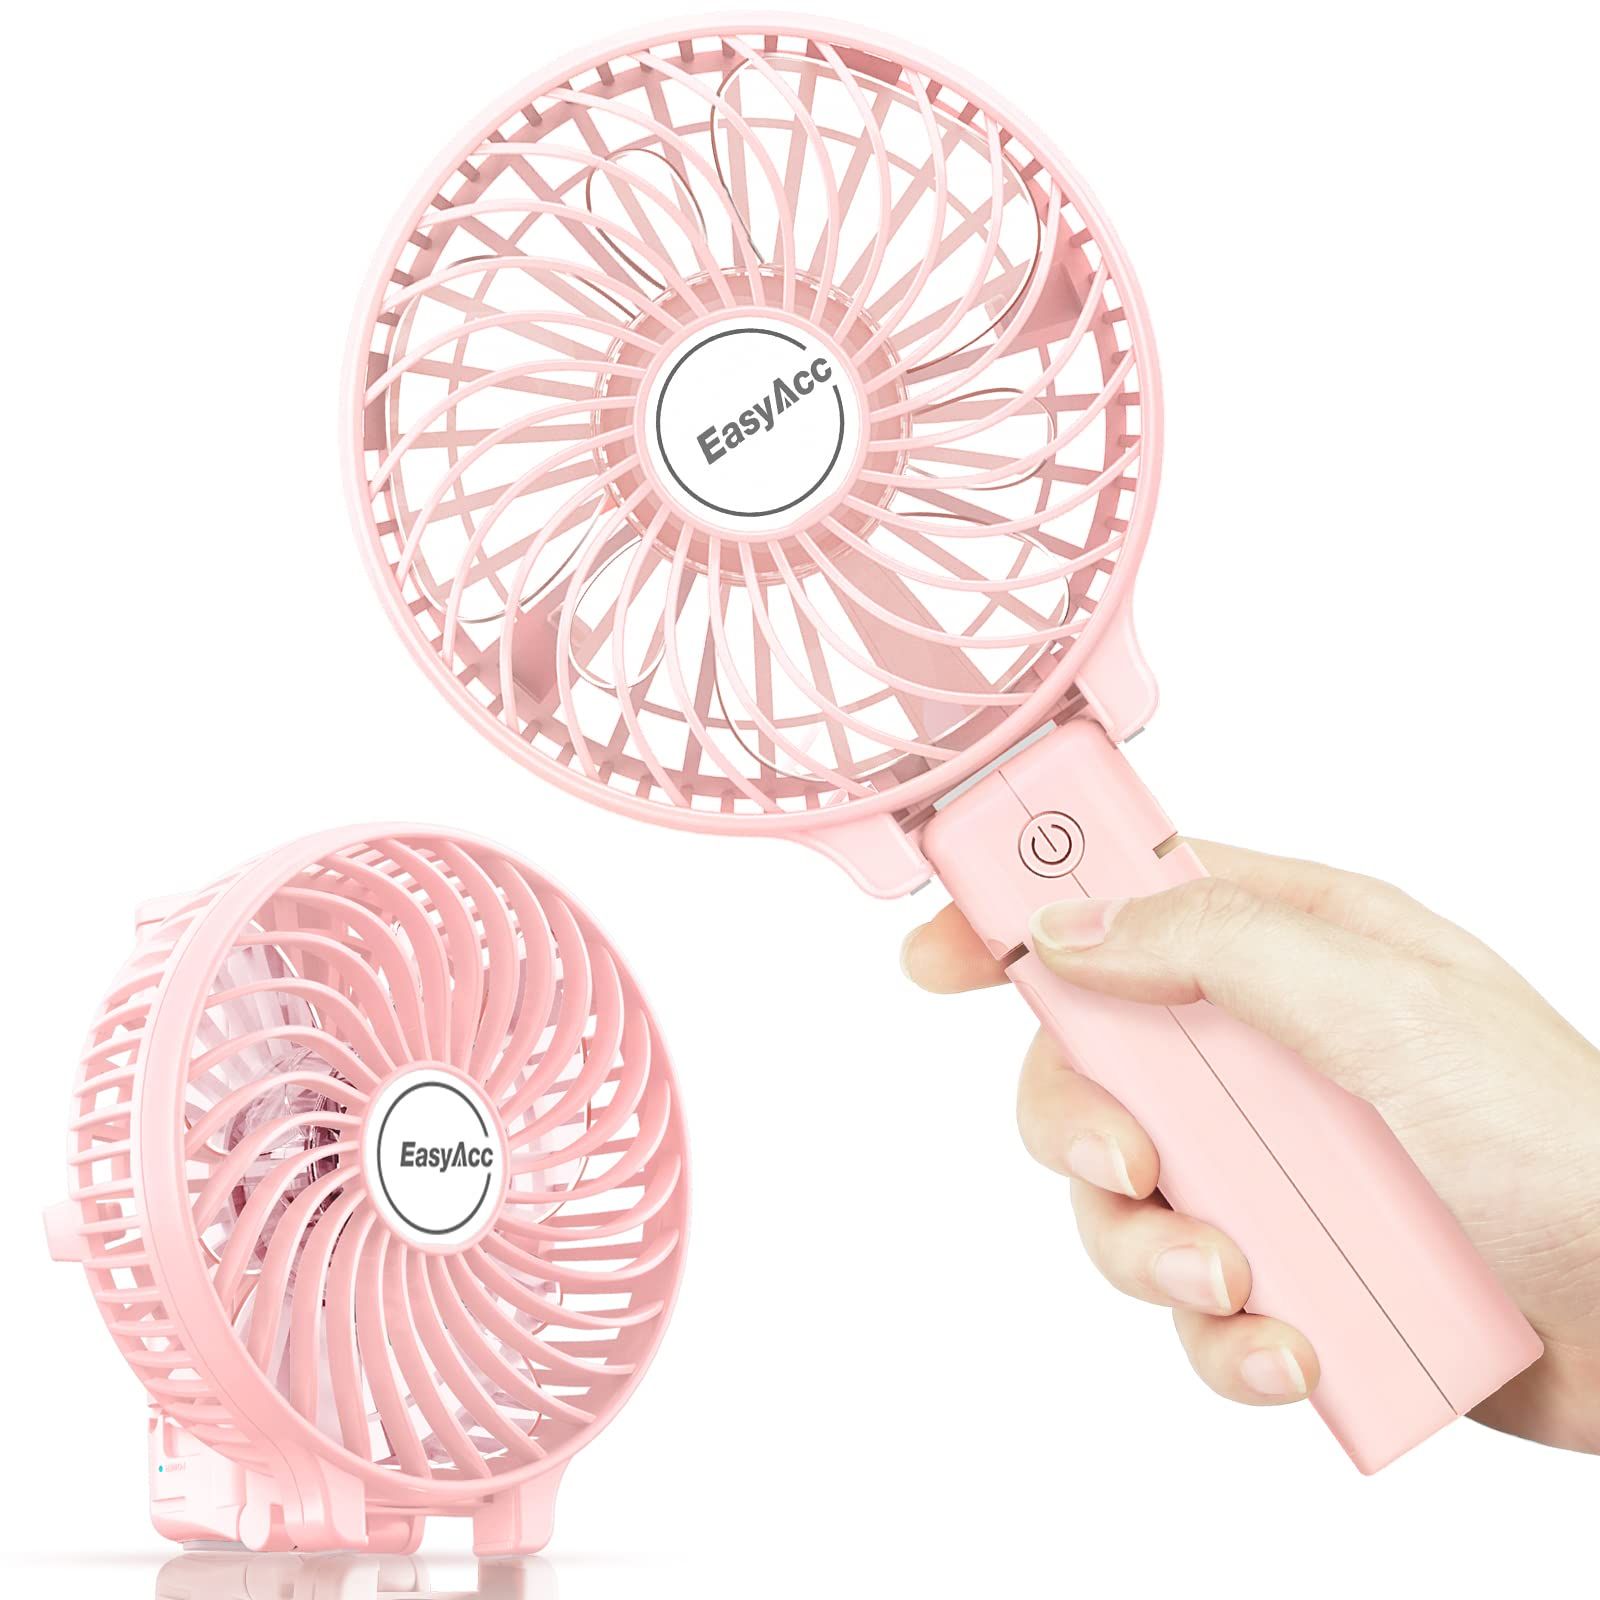 EasyAcc Mini Handheld Fan, USB Desk Fan Small Personal Portable Stroller Table Fan with Rechargeable Battery Operated Cooling Folding Electric Fan 3-10H Working Hours for Travel Office Outdoor | Amazon (US)